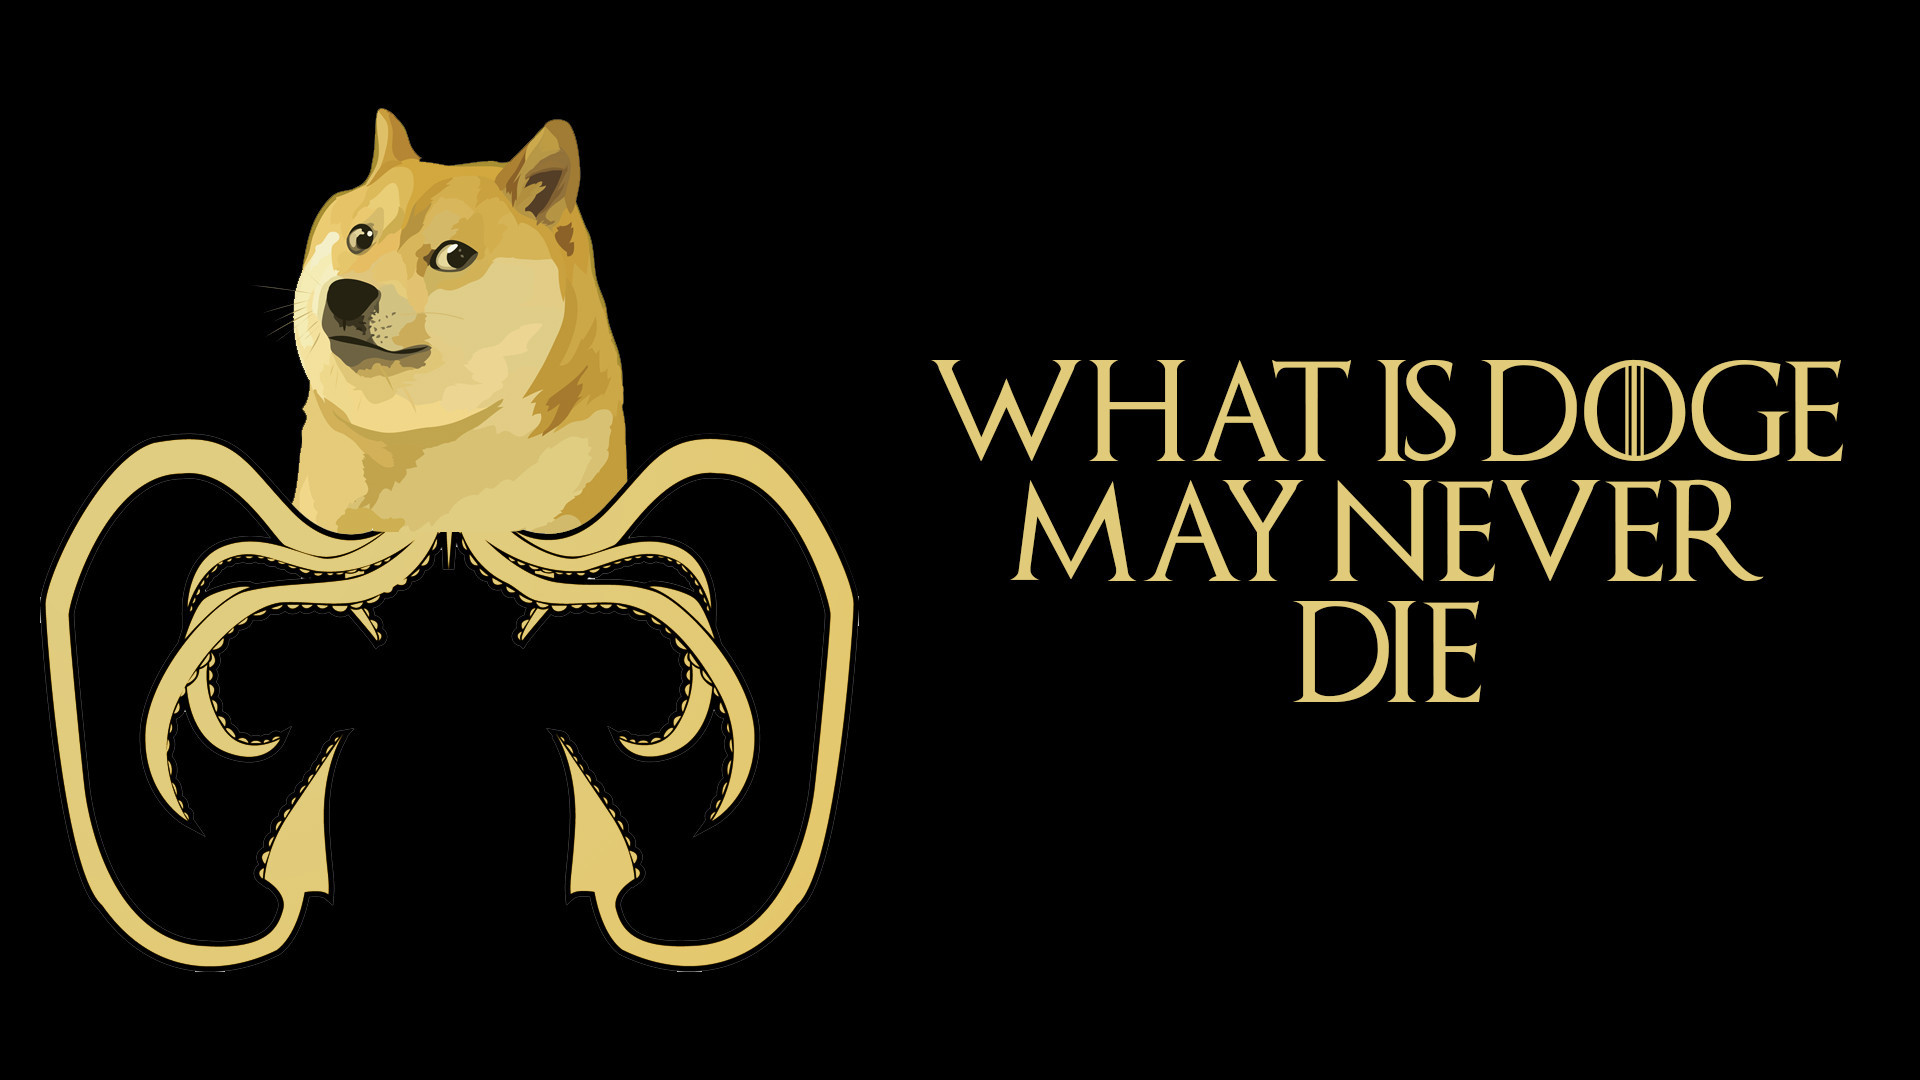 1920x1080 Dogecoin: I made a doge wallpaper for all the Game of Thrones shines [No  Spoilers]